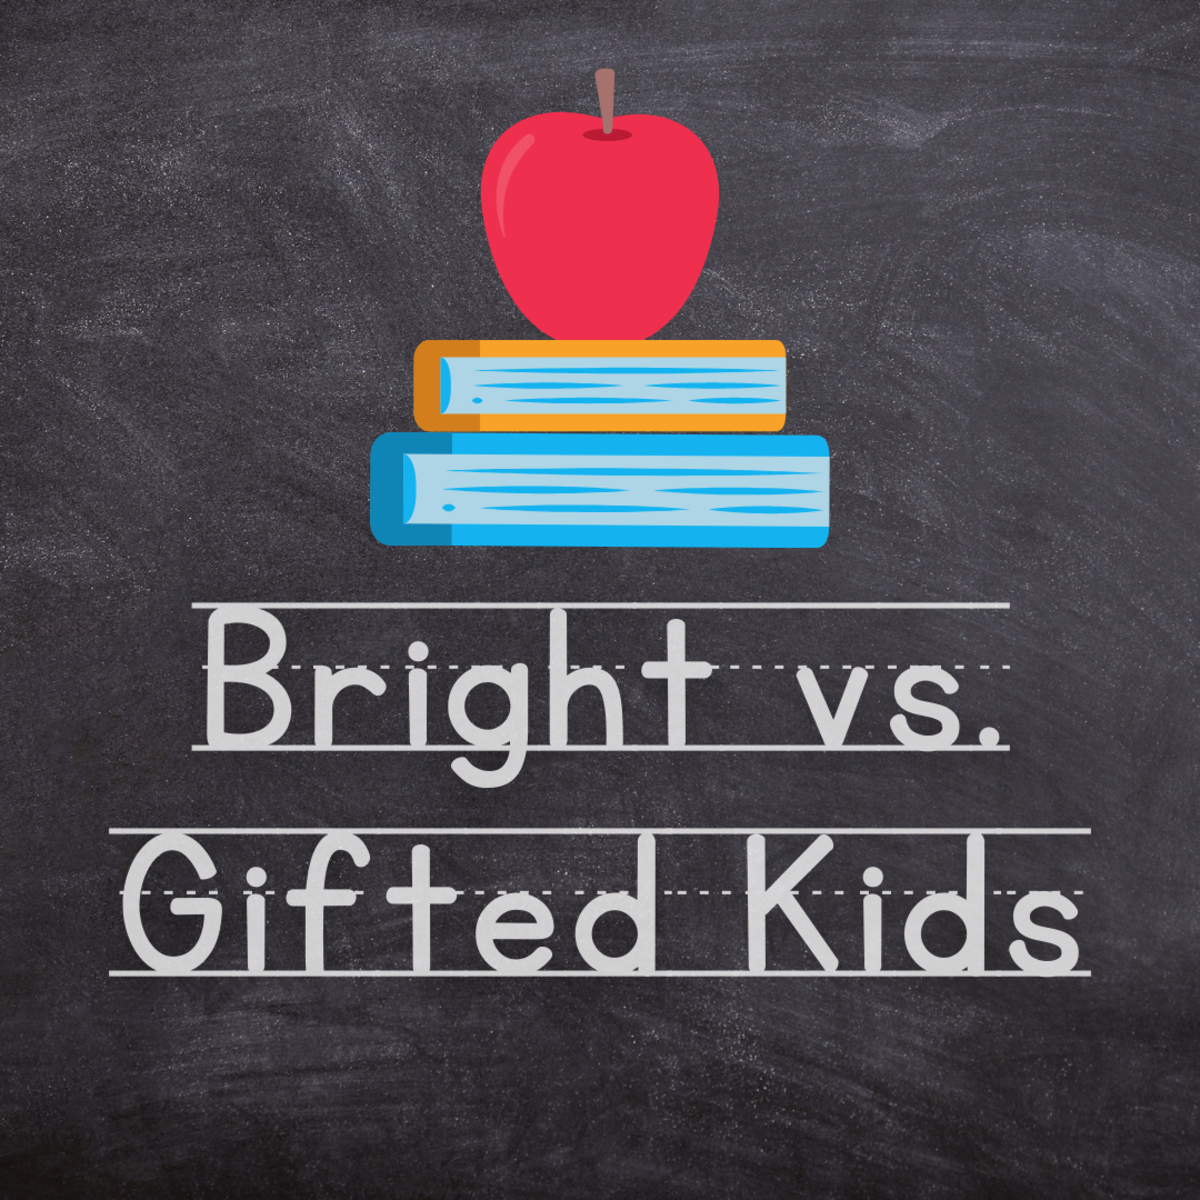 Are There Differences Between “Gifted” and “Bright” Children?